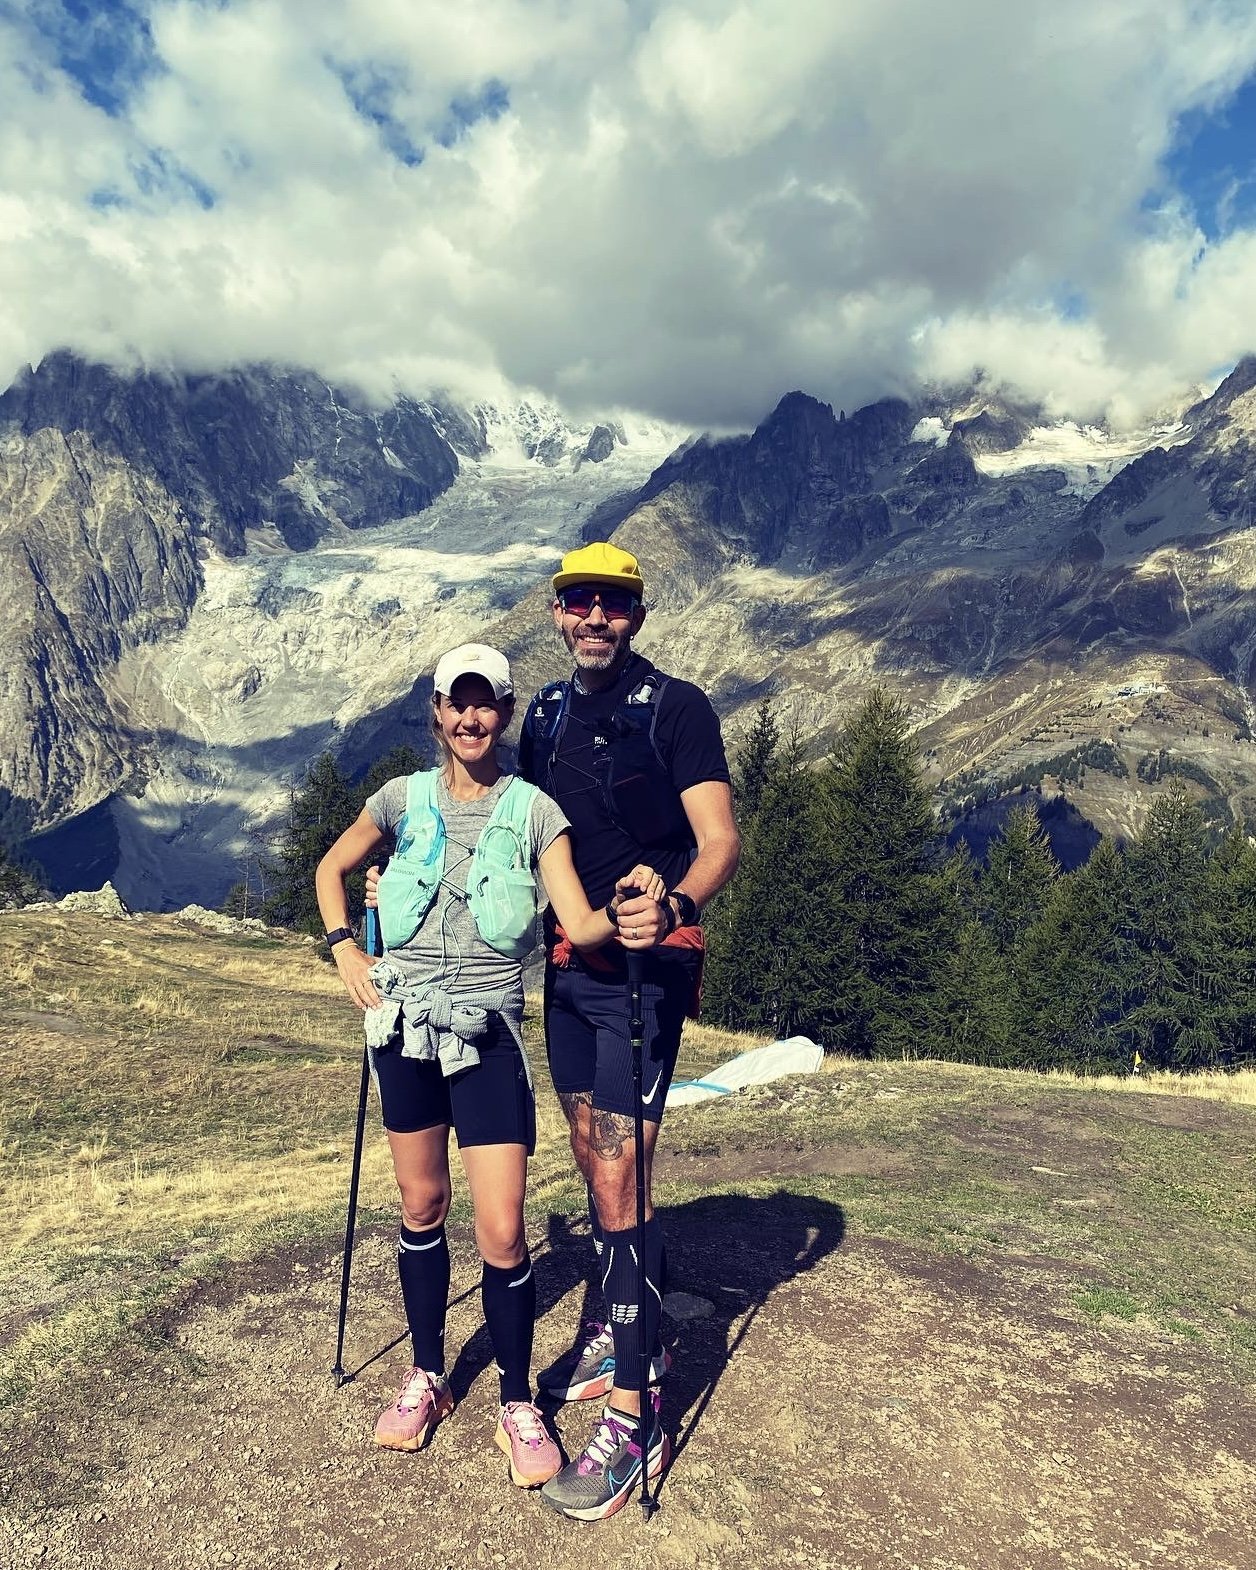   Name:  Devon   Hometown:  Portland, OR, USA   Which Runcation did you attend:  Tour du Mont Blanc   What is your profession:  Registered Nurse, Yoga Instructor, Personal Trainer   How long have you been running?:  20 years.   Did you have experienc